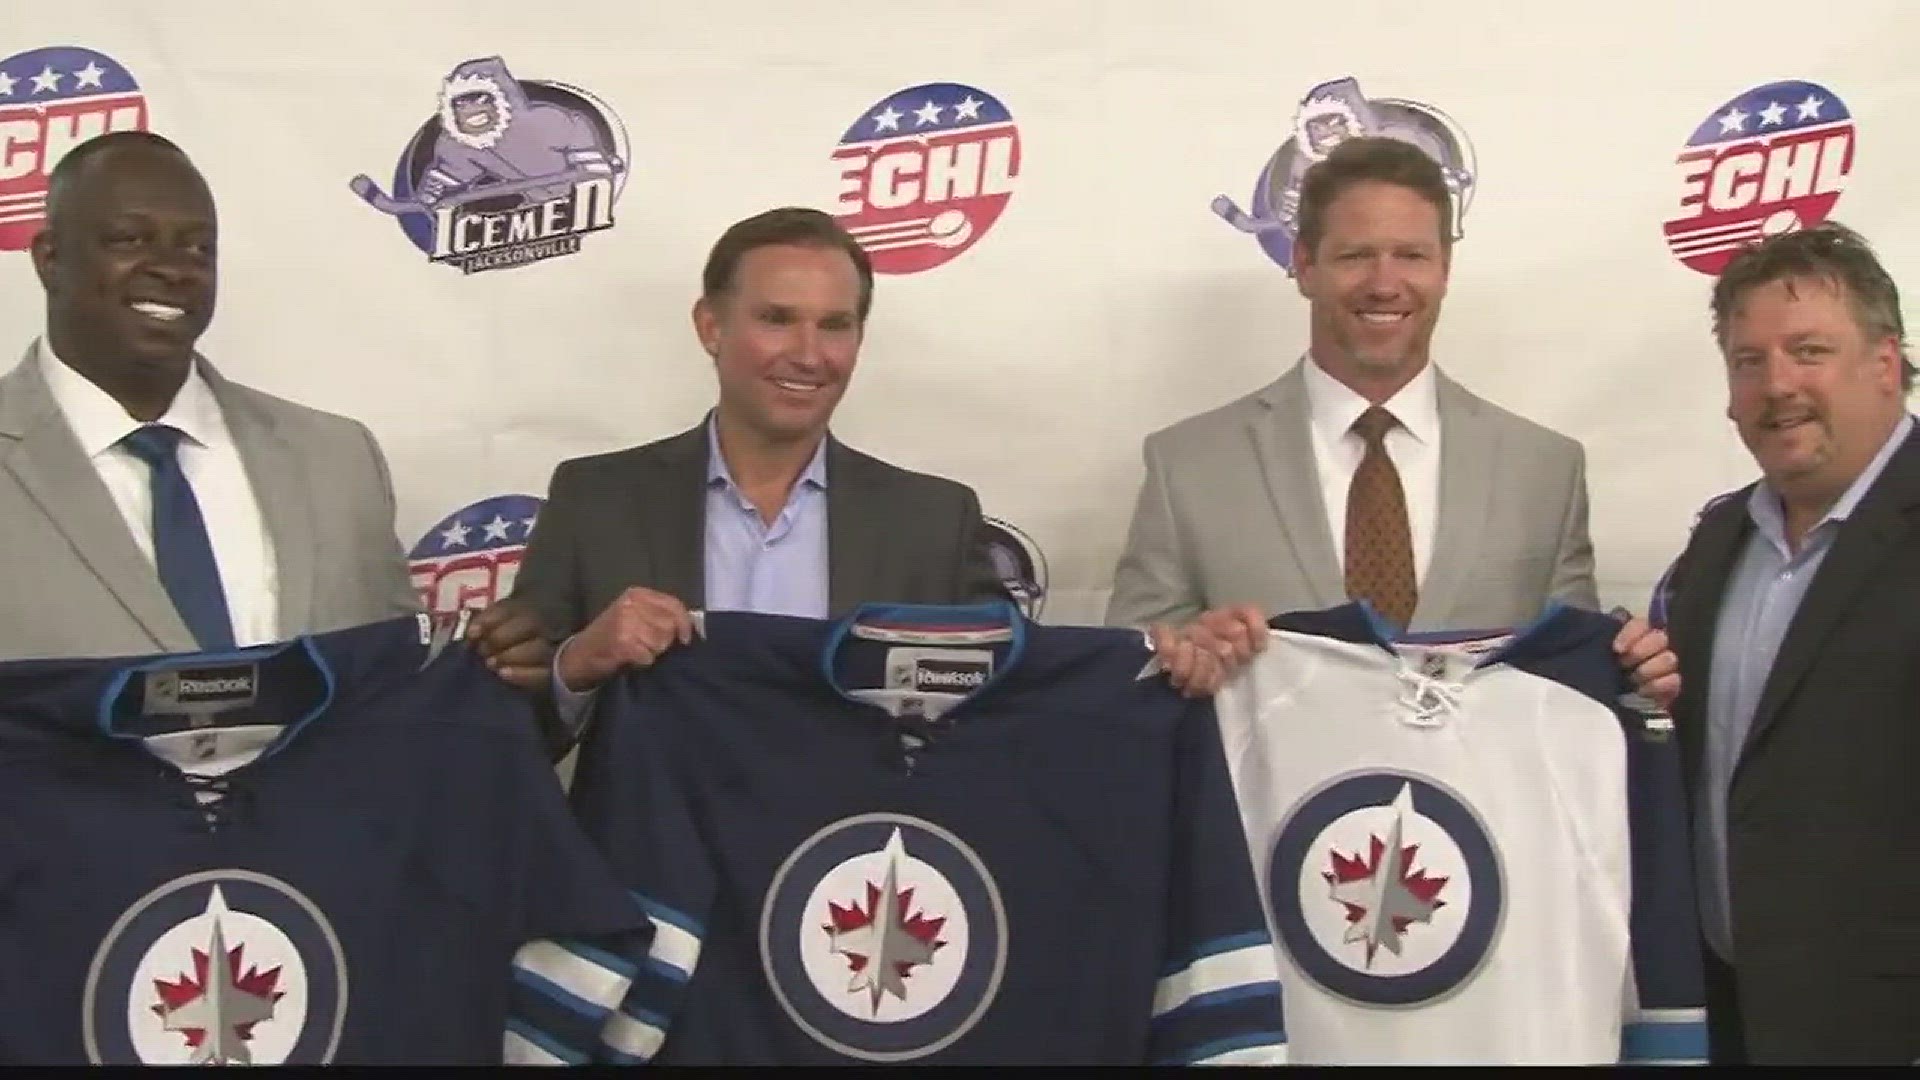 The Jacksonville IceMen announced a partnership with the Winnipeg Jets on Thursday. With a rich history and promising prospects, the Jets will serve as the IceMen's NHL affiliate and the Manitoba Moose will be their AHL partners.